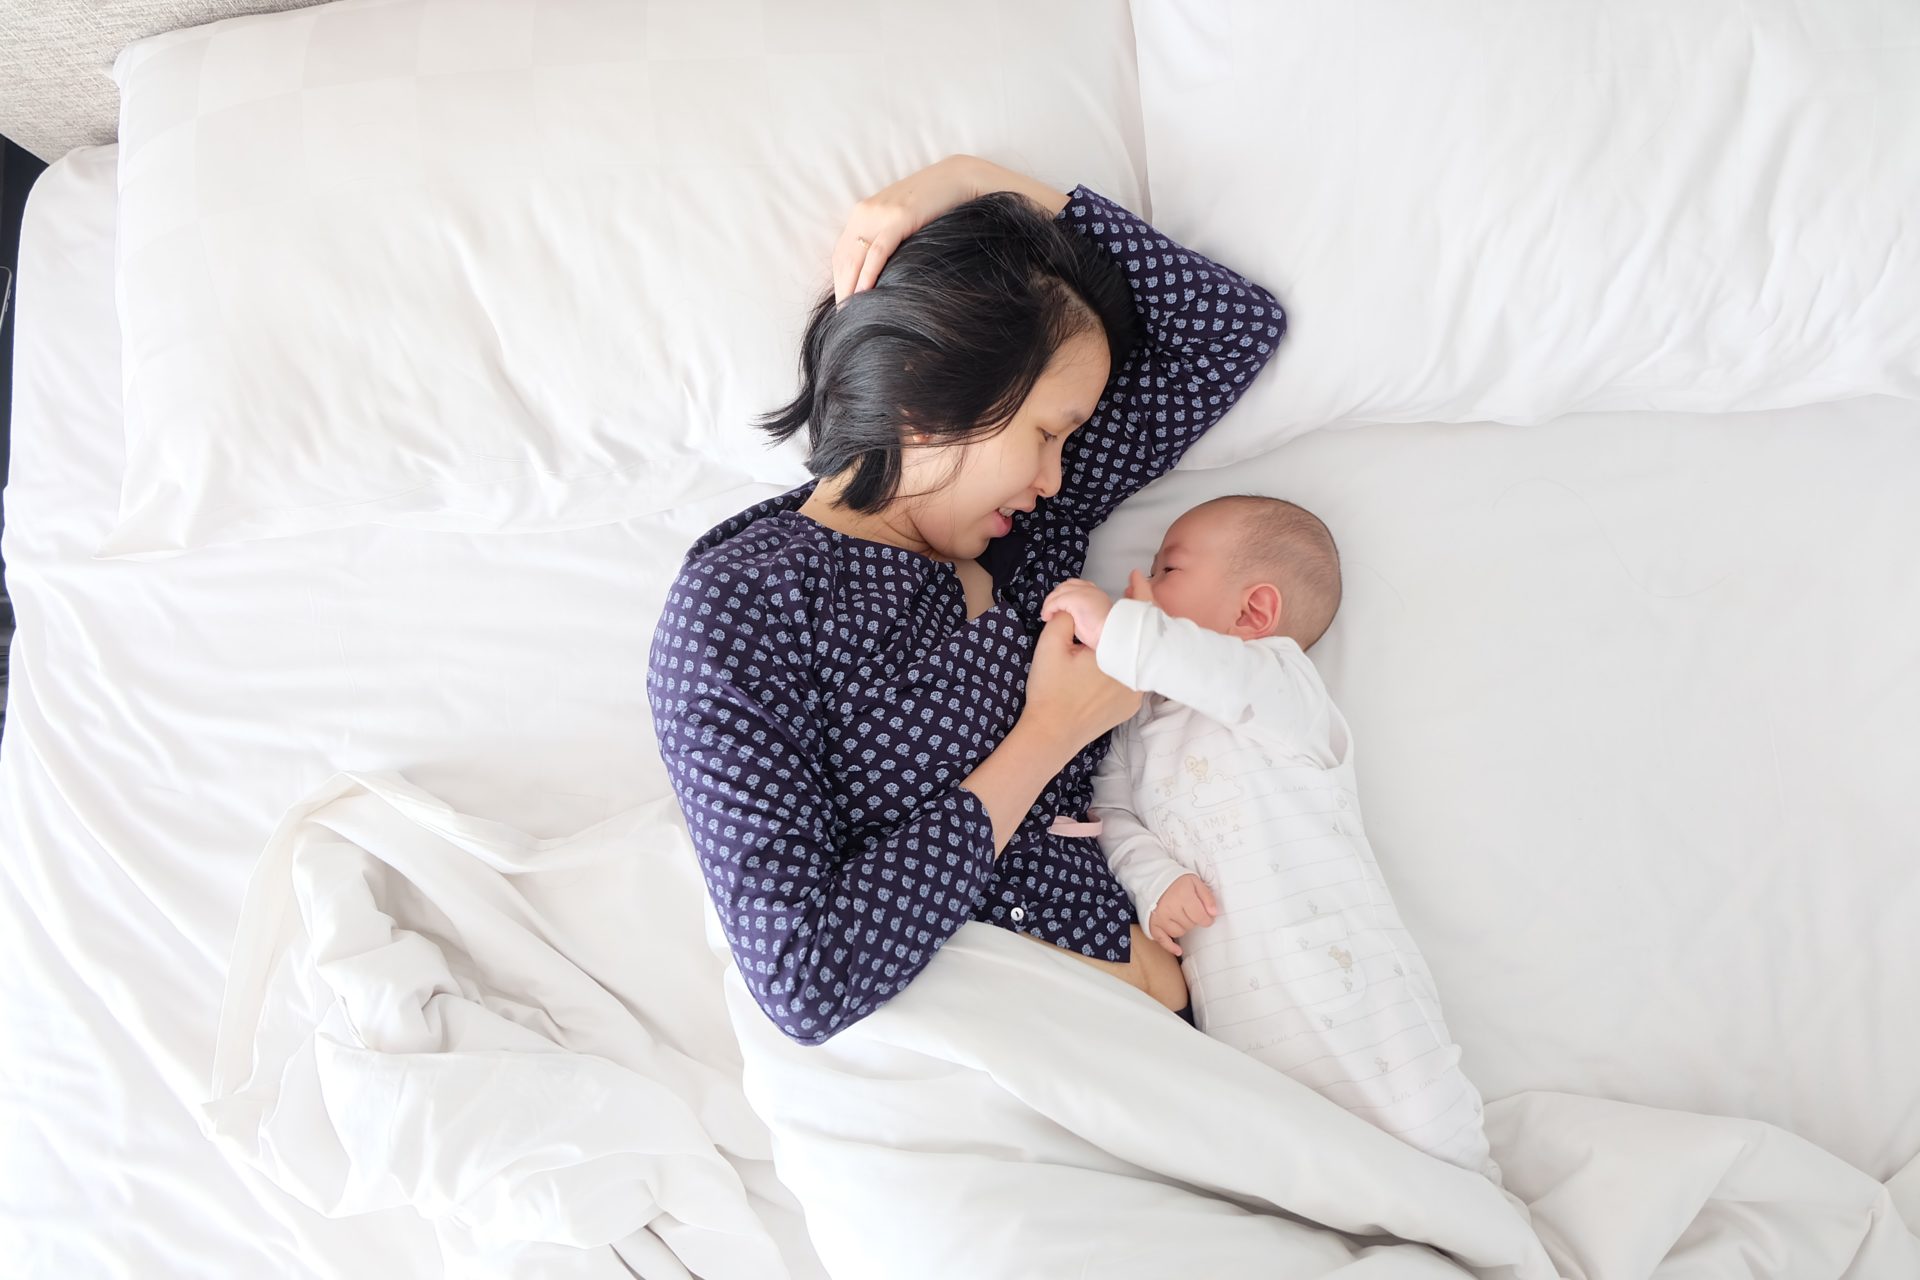 THOUGHTFUL GIFTS FOR THE NEW MOM